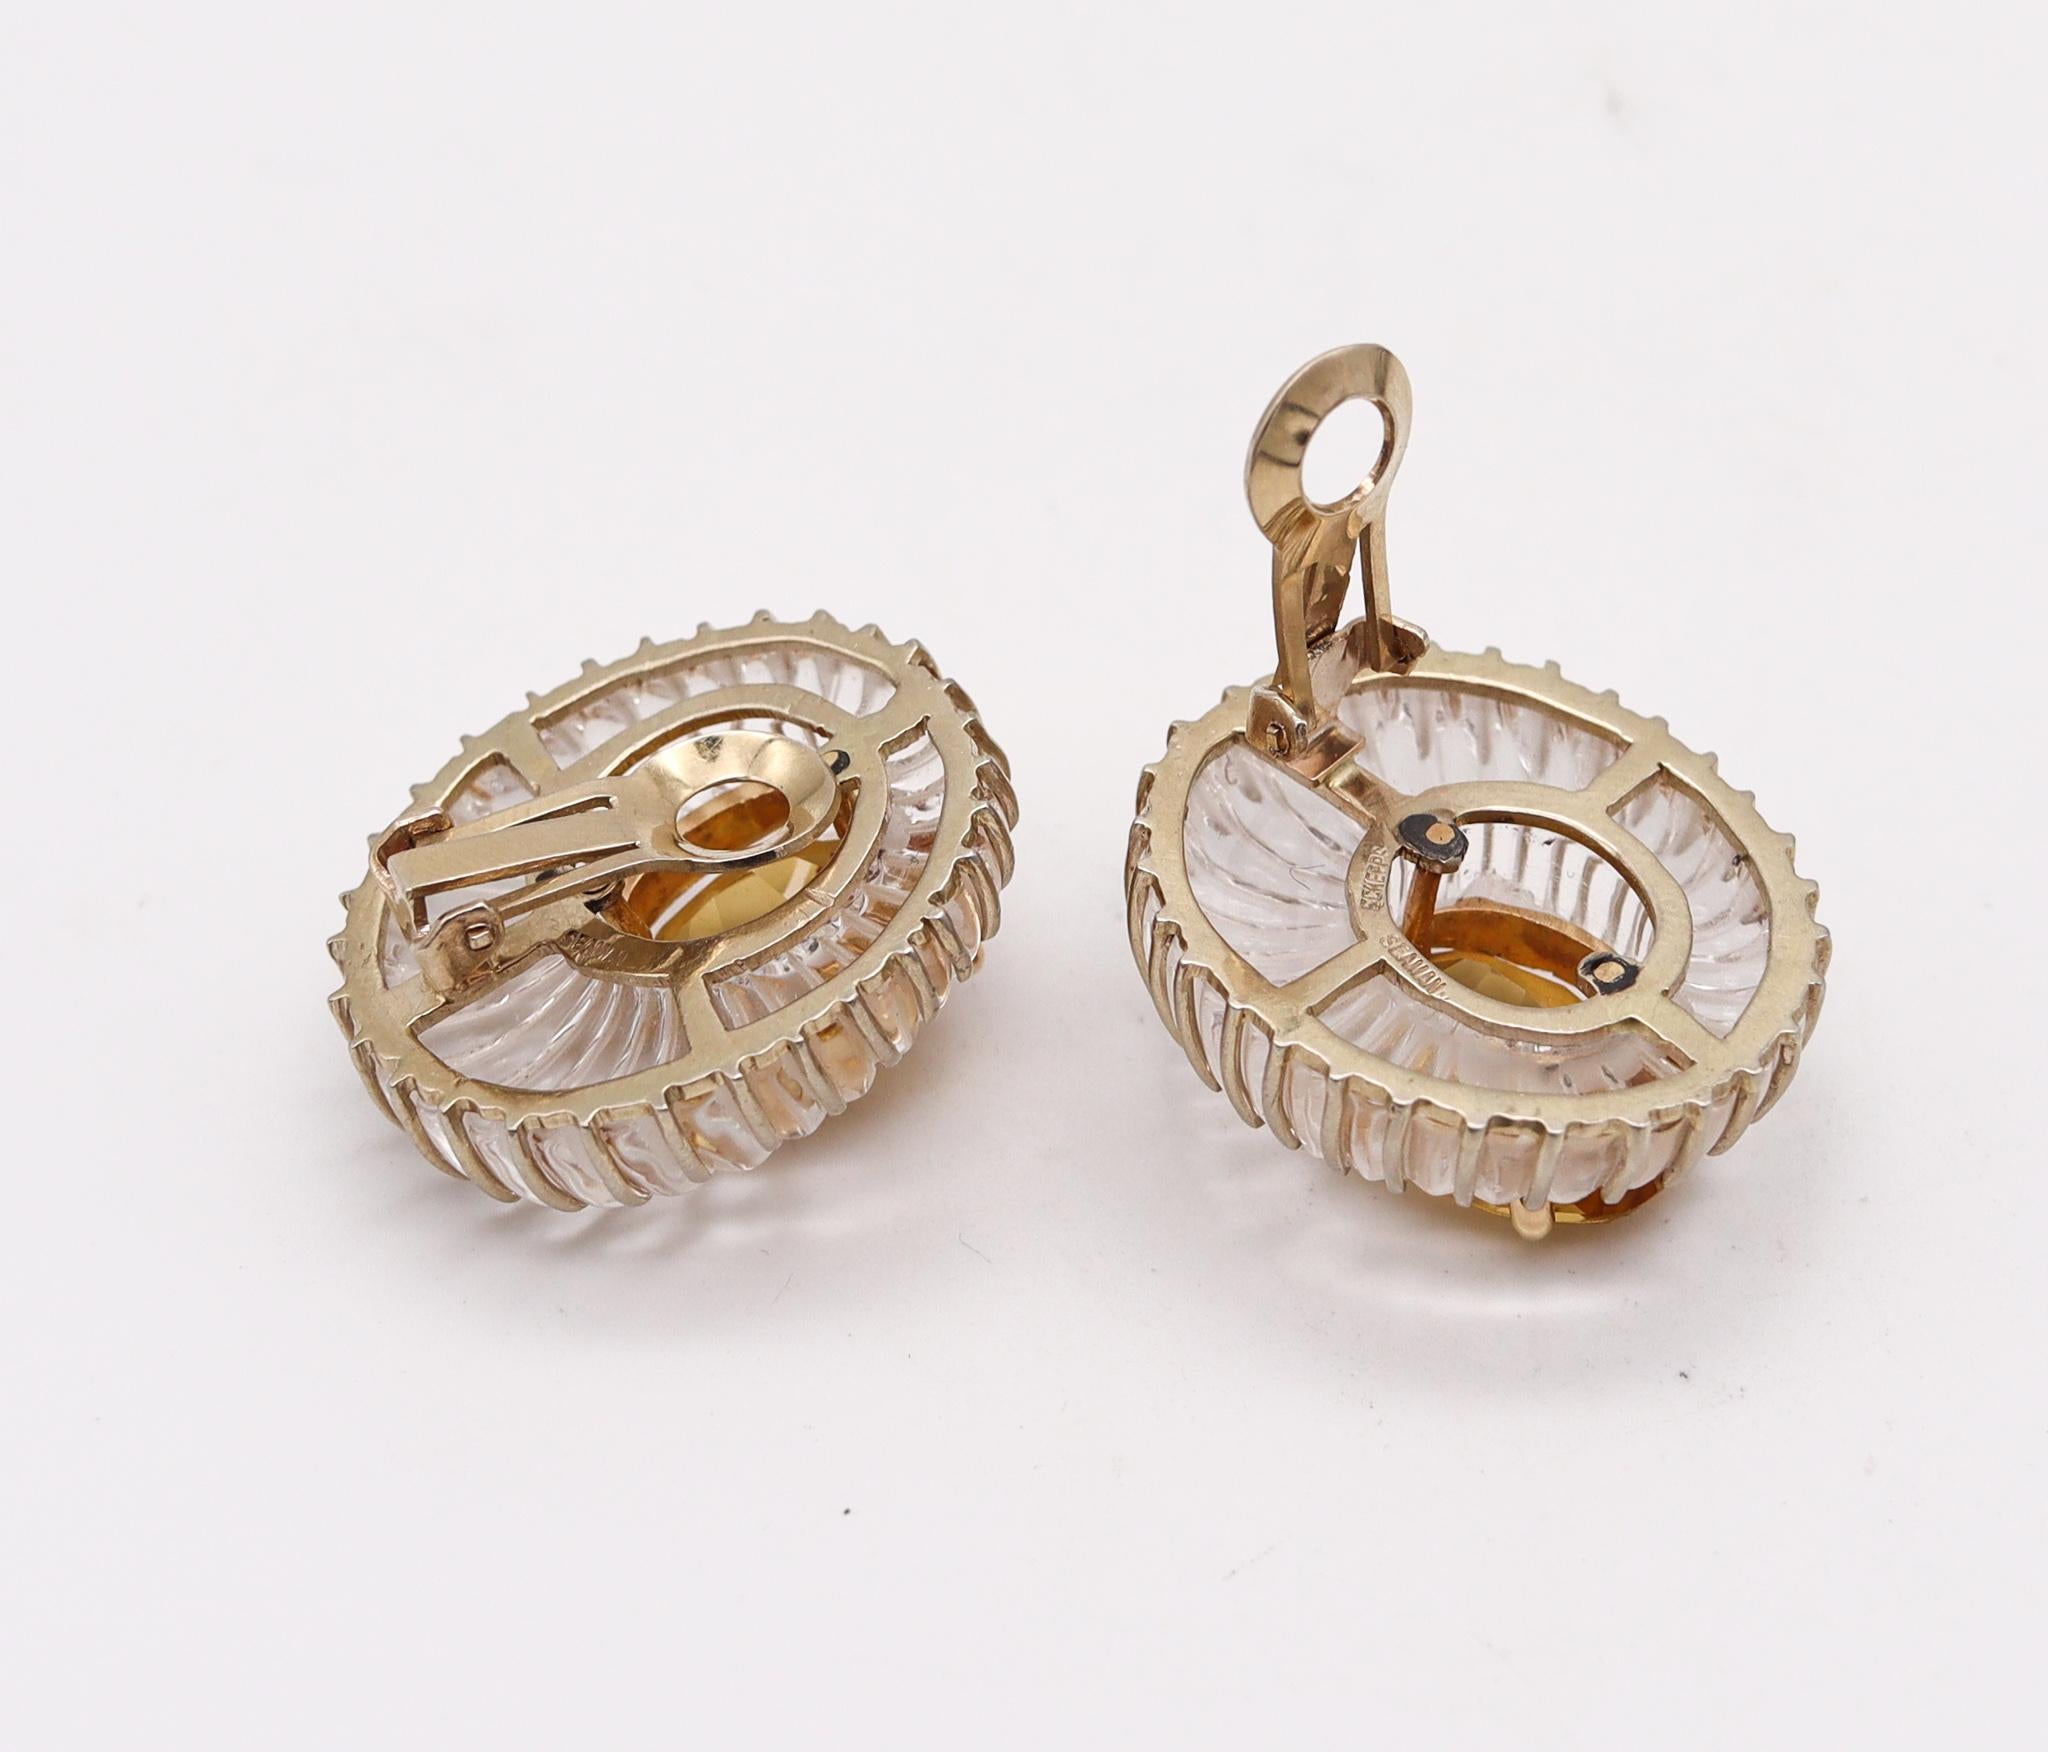 Cabochon Seaman Schepps 1970 Fluted Rock Quartz Earrings 14kt Gold with 79.32cts Citrine For Sale